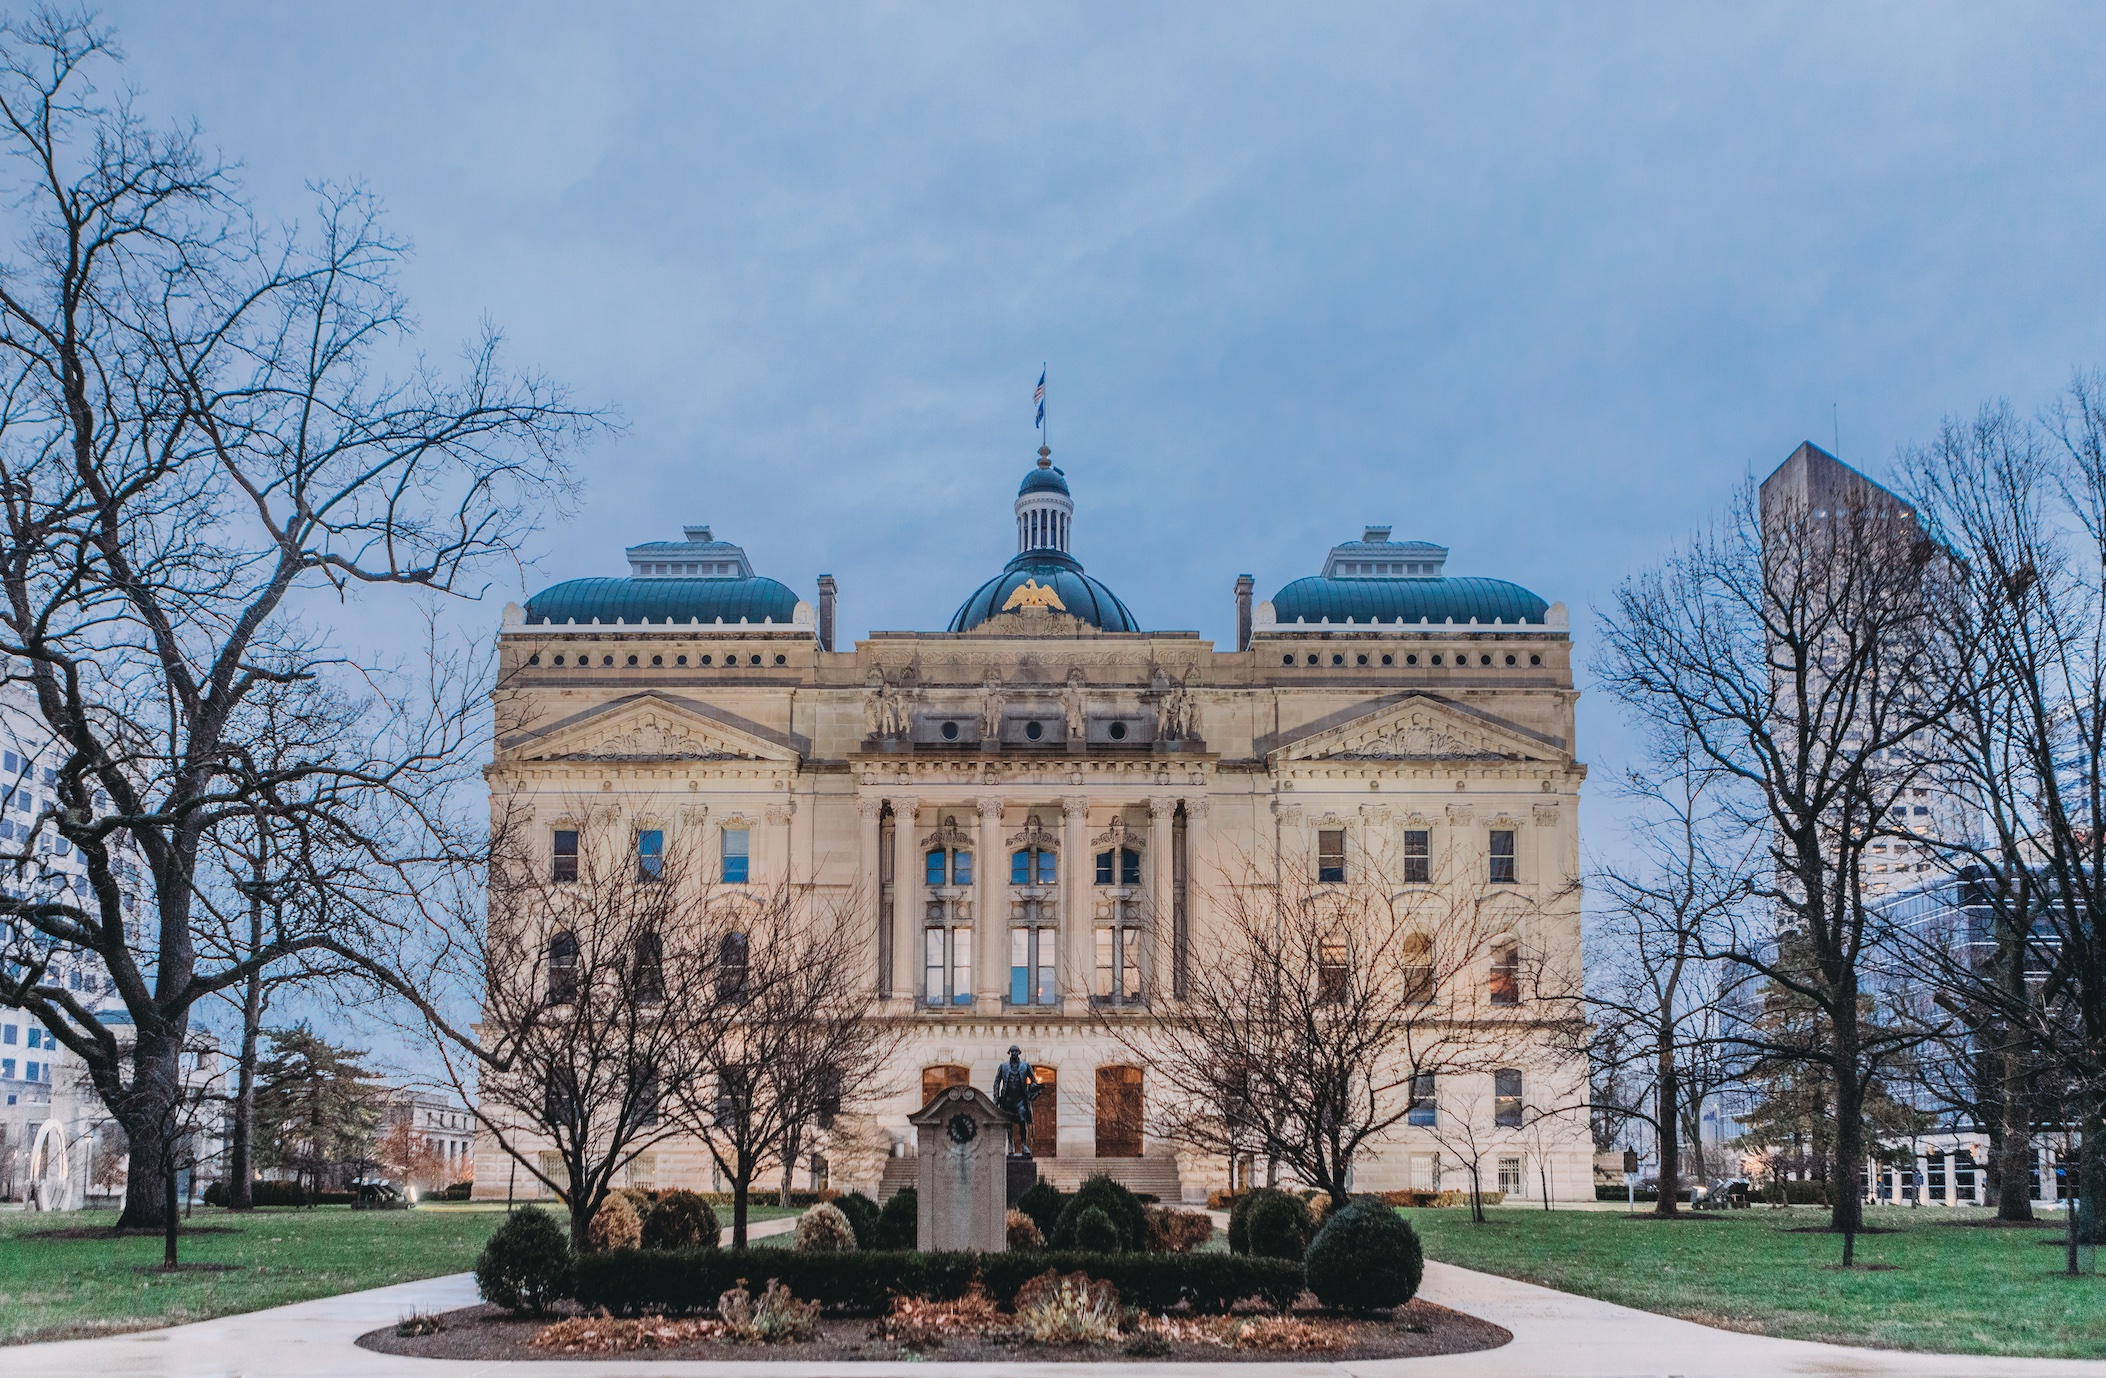 Indiana State House on a cloudy winter day; image by Steven Van Elk, via Unsplash.com.